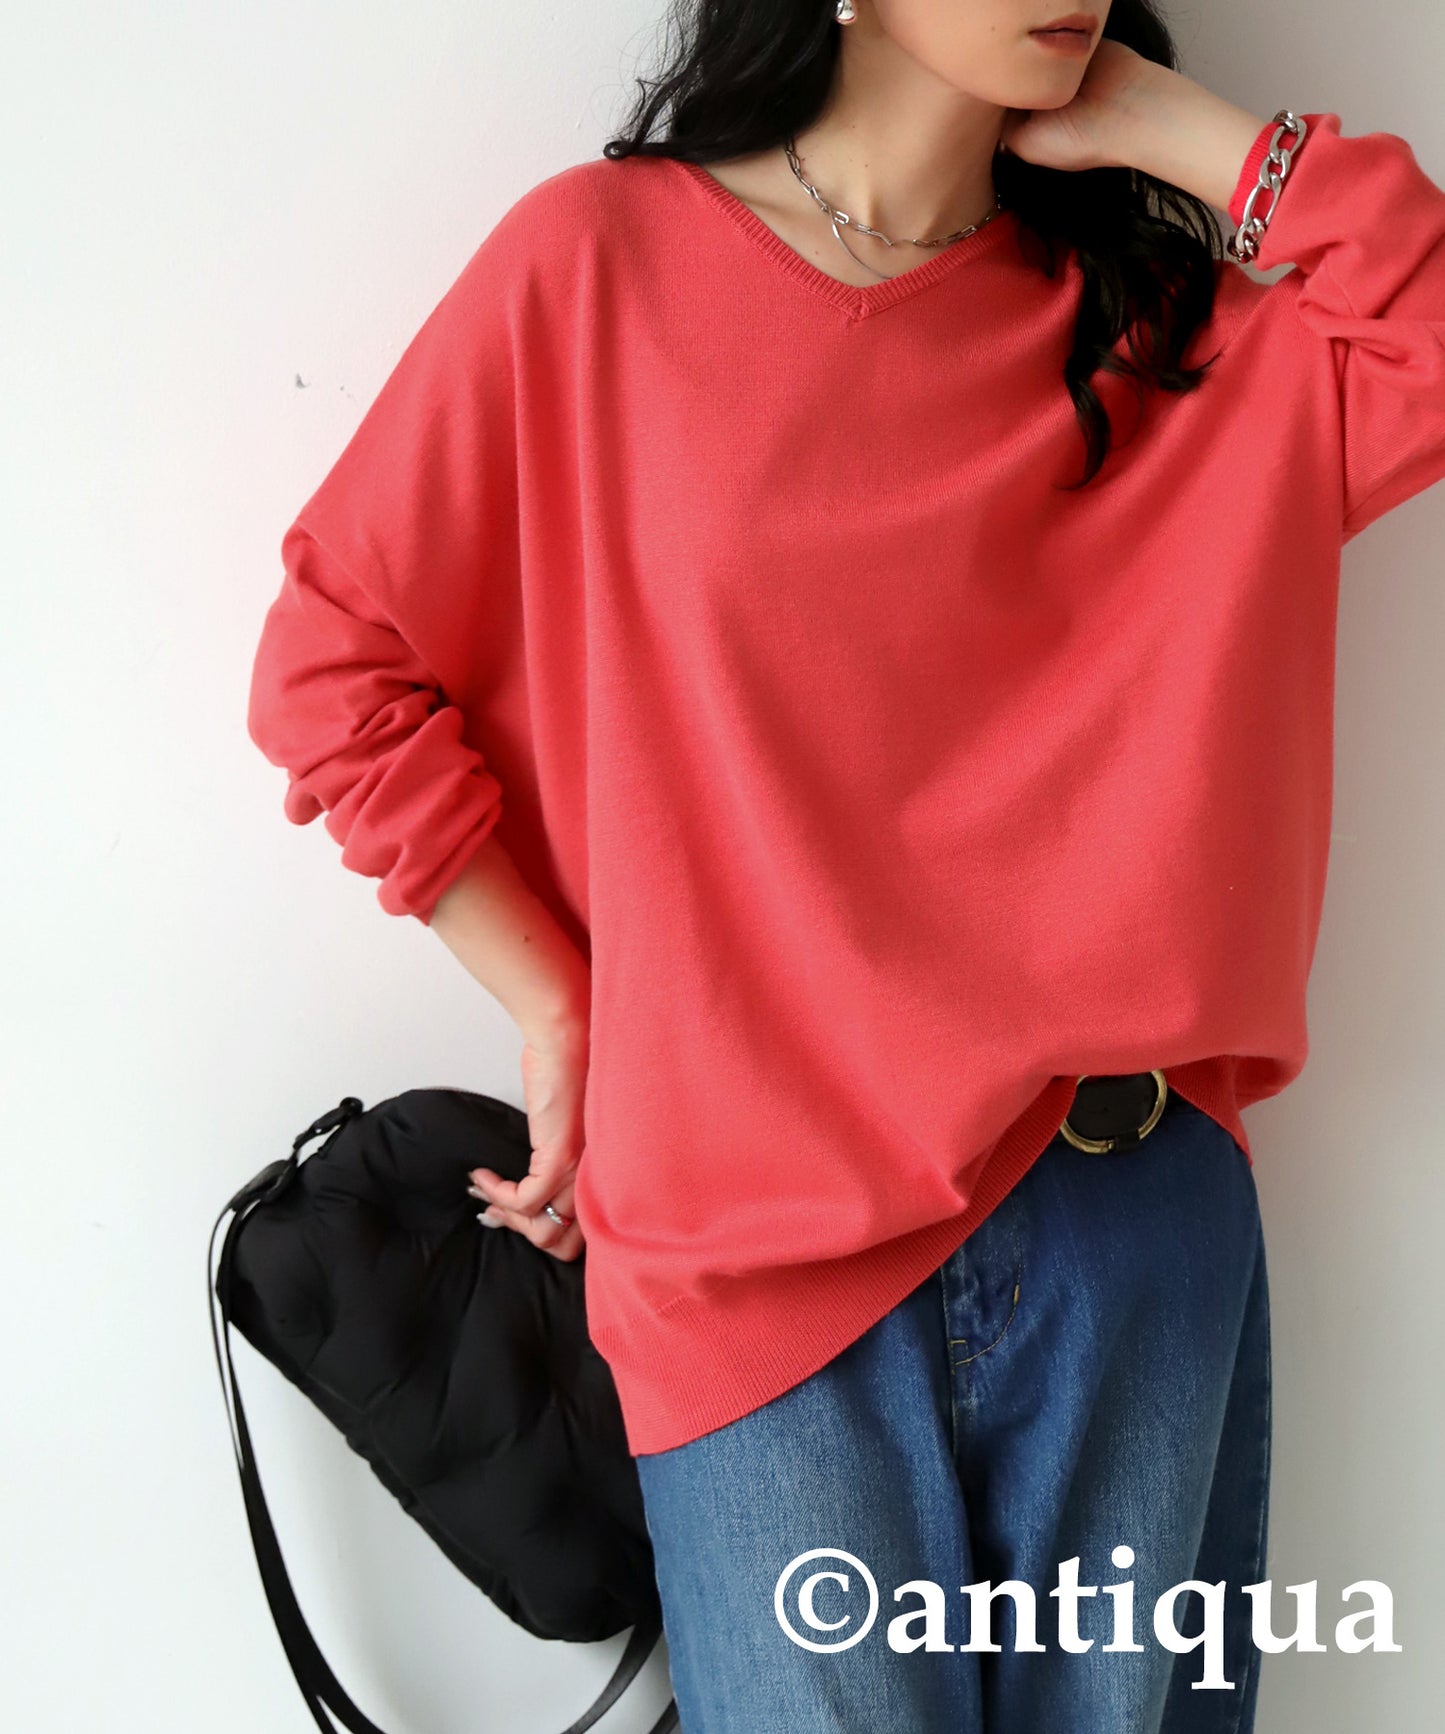 Function material knit tops long sleeves Ladies knit tops